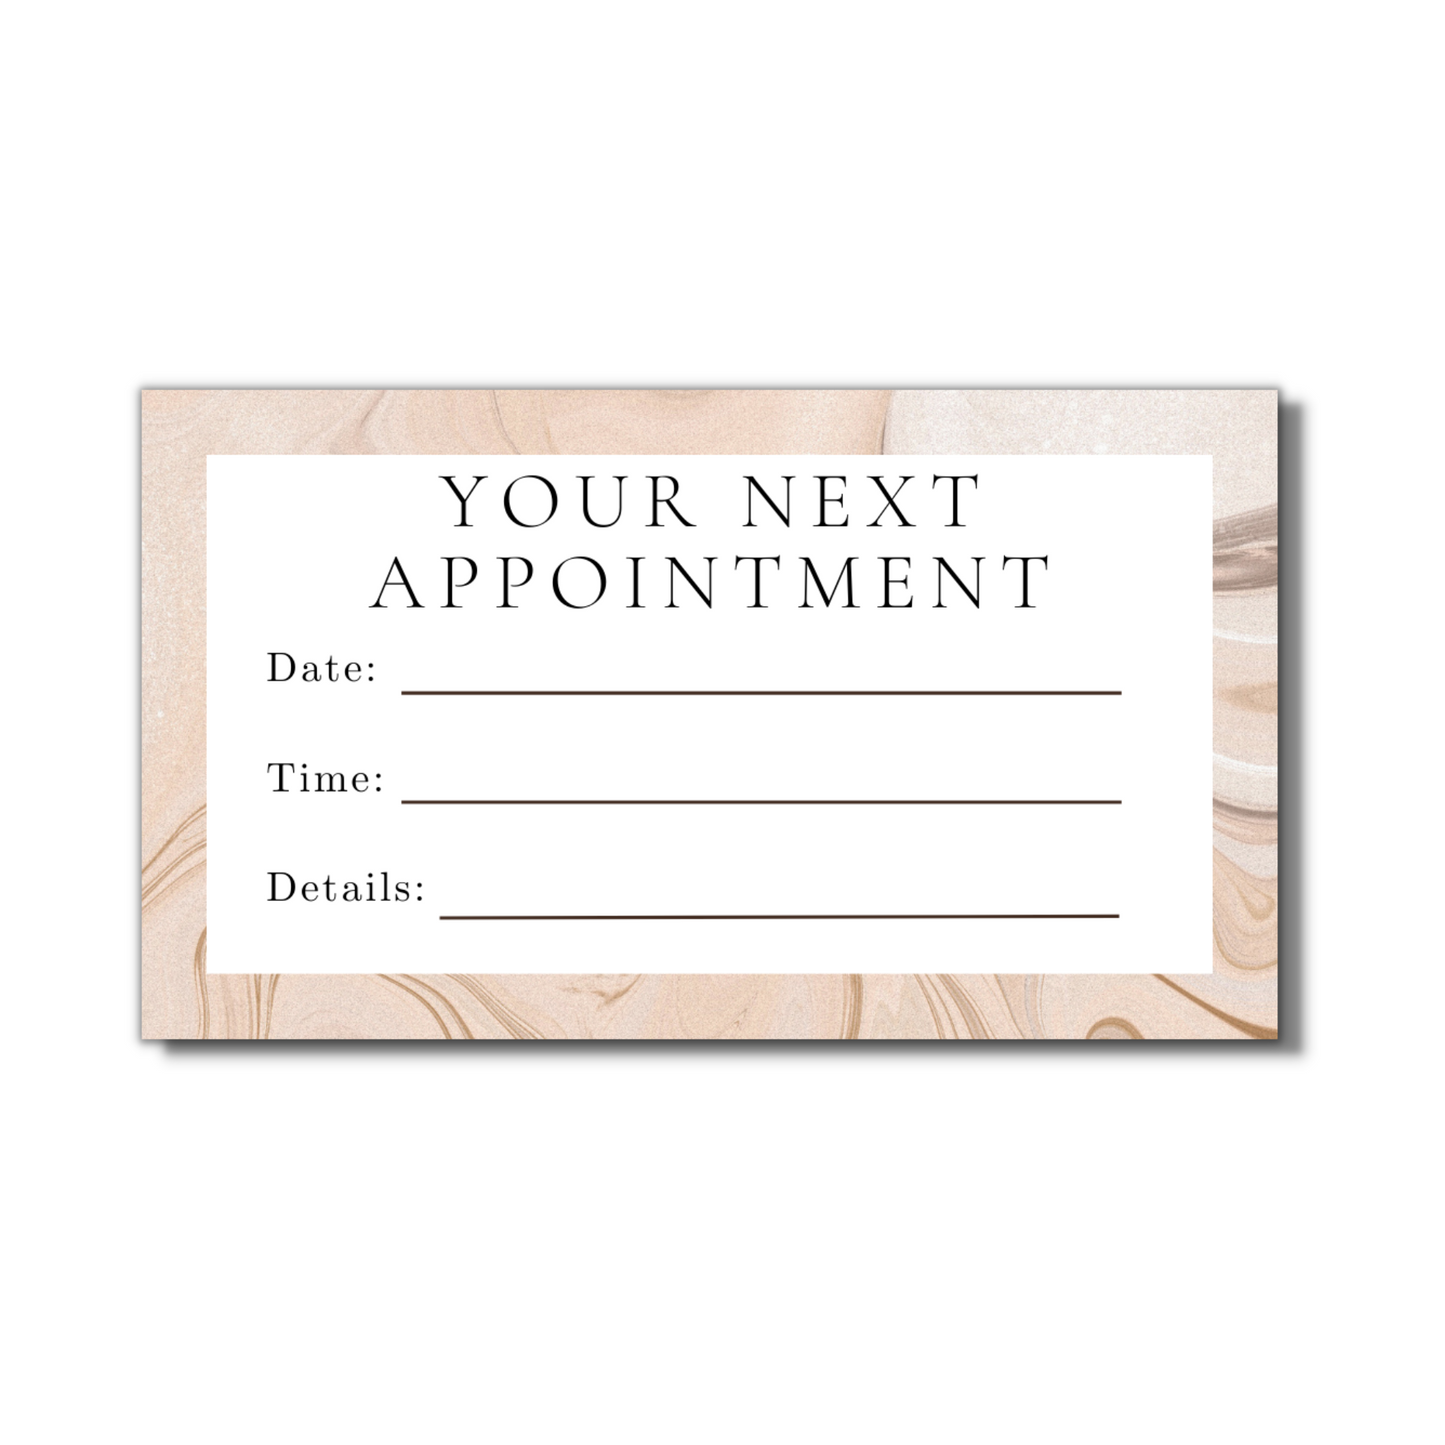 Appointment Card